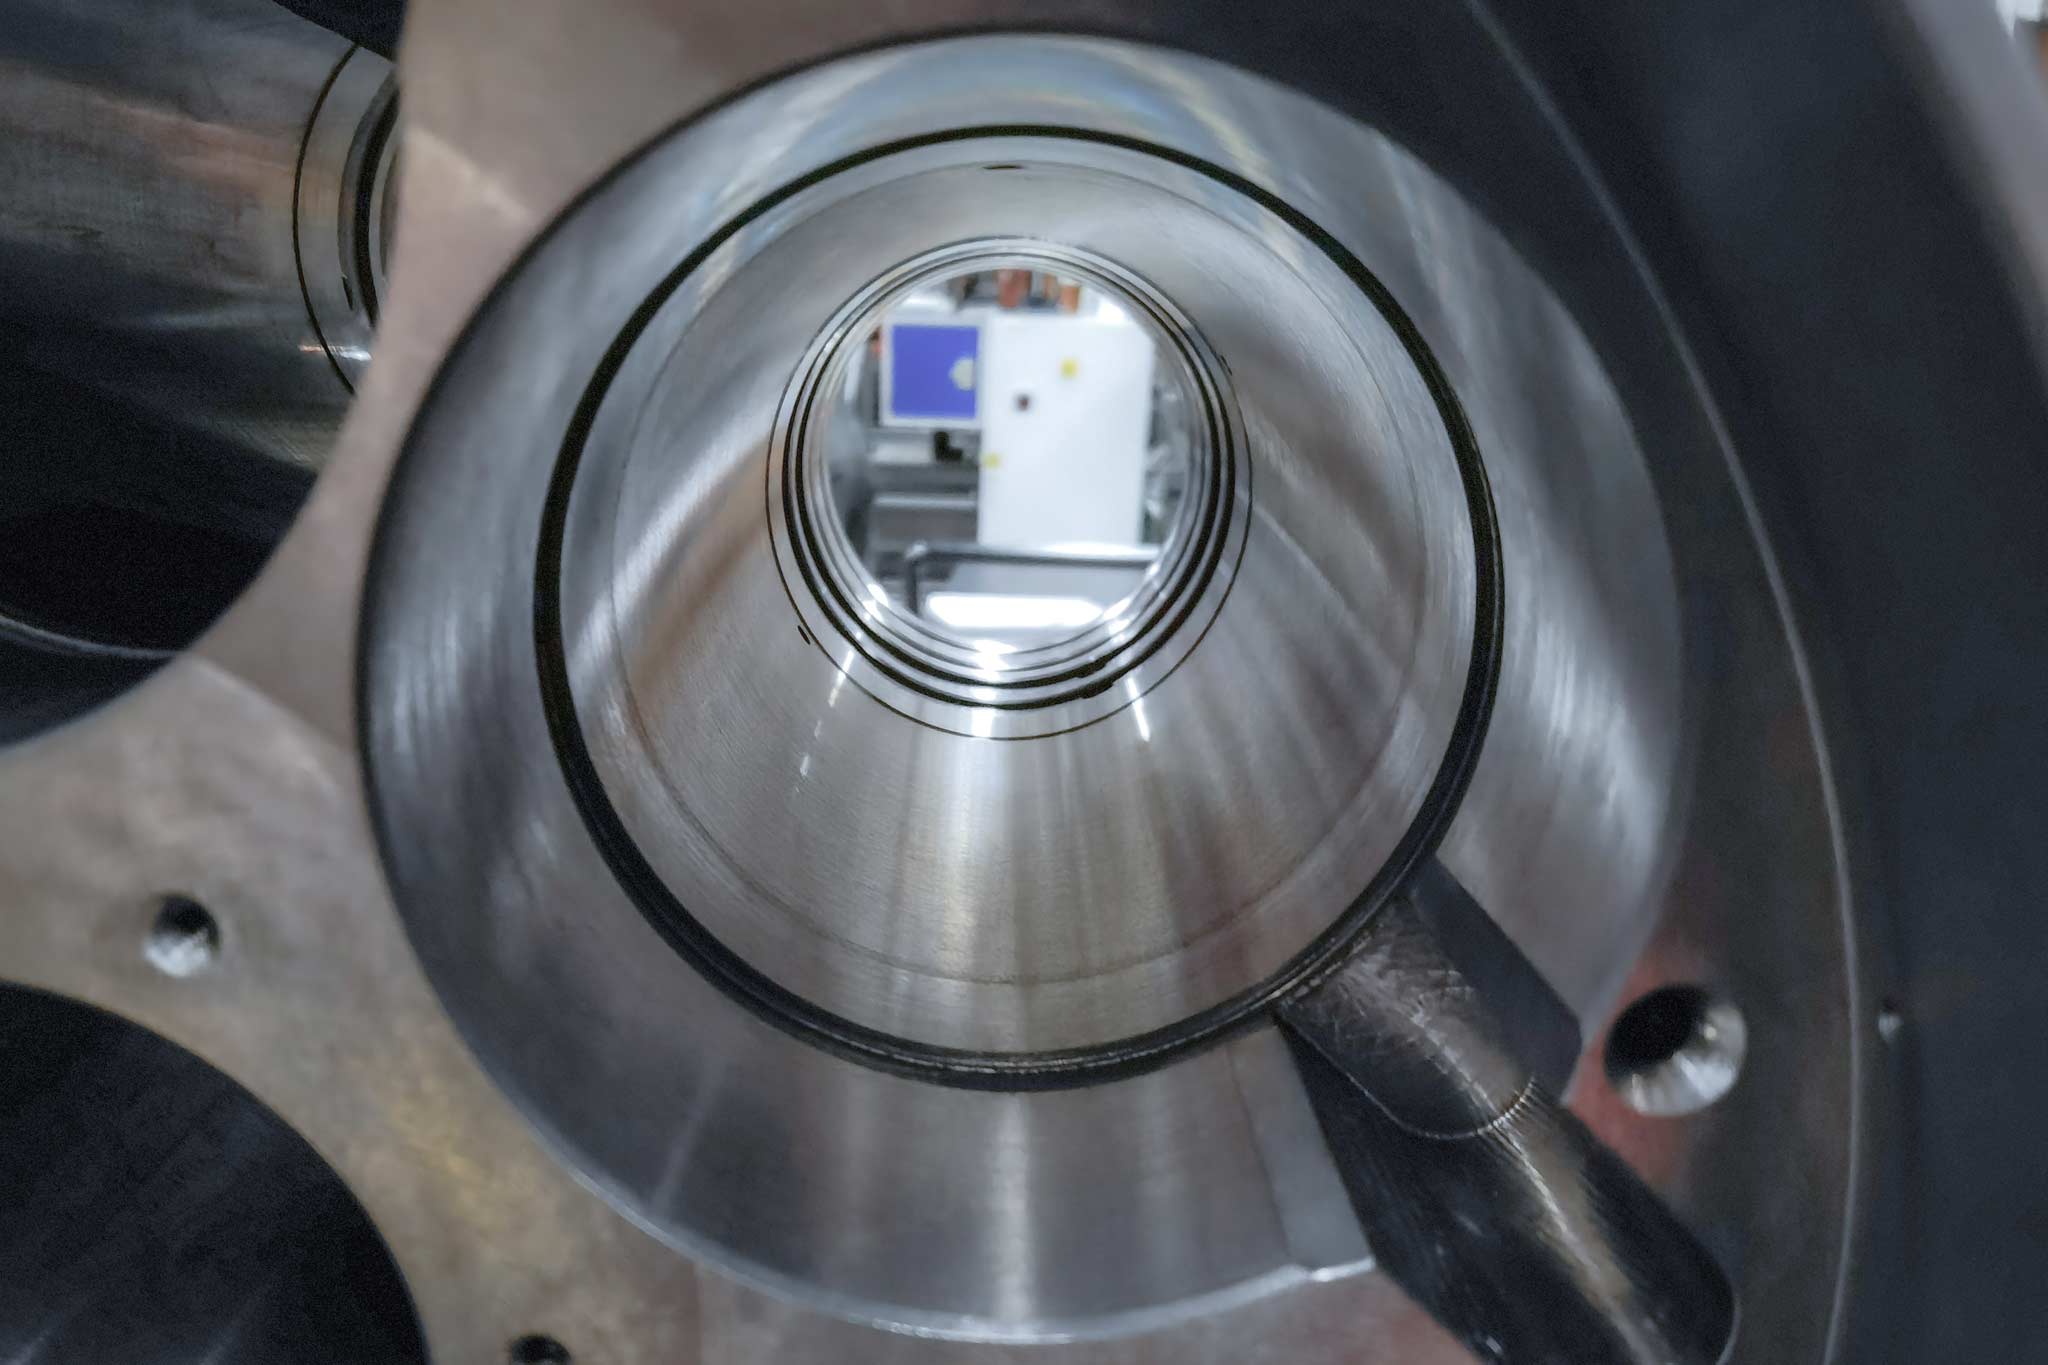 A close-up on a bore to be machined shows the cylindrical areas merging into each other.